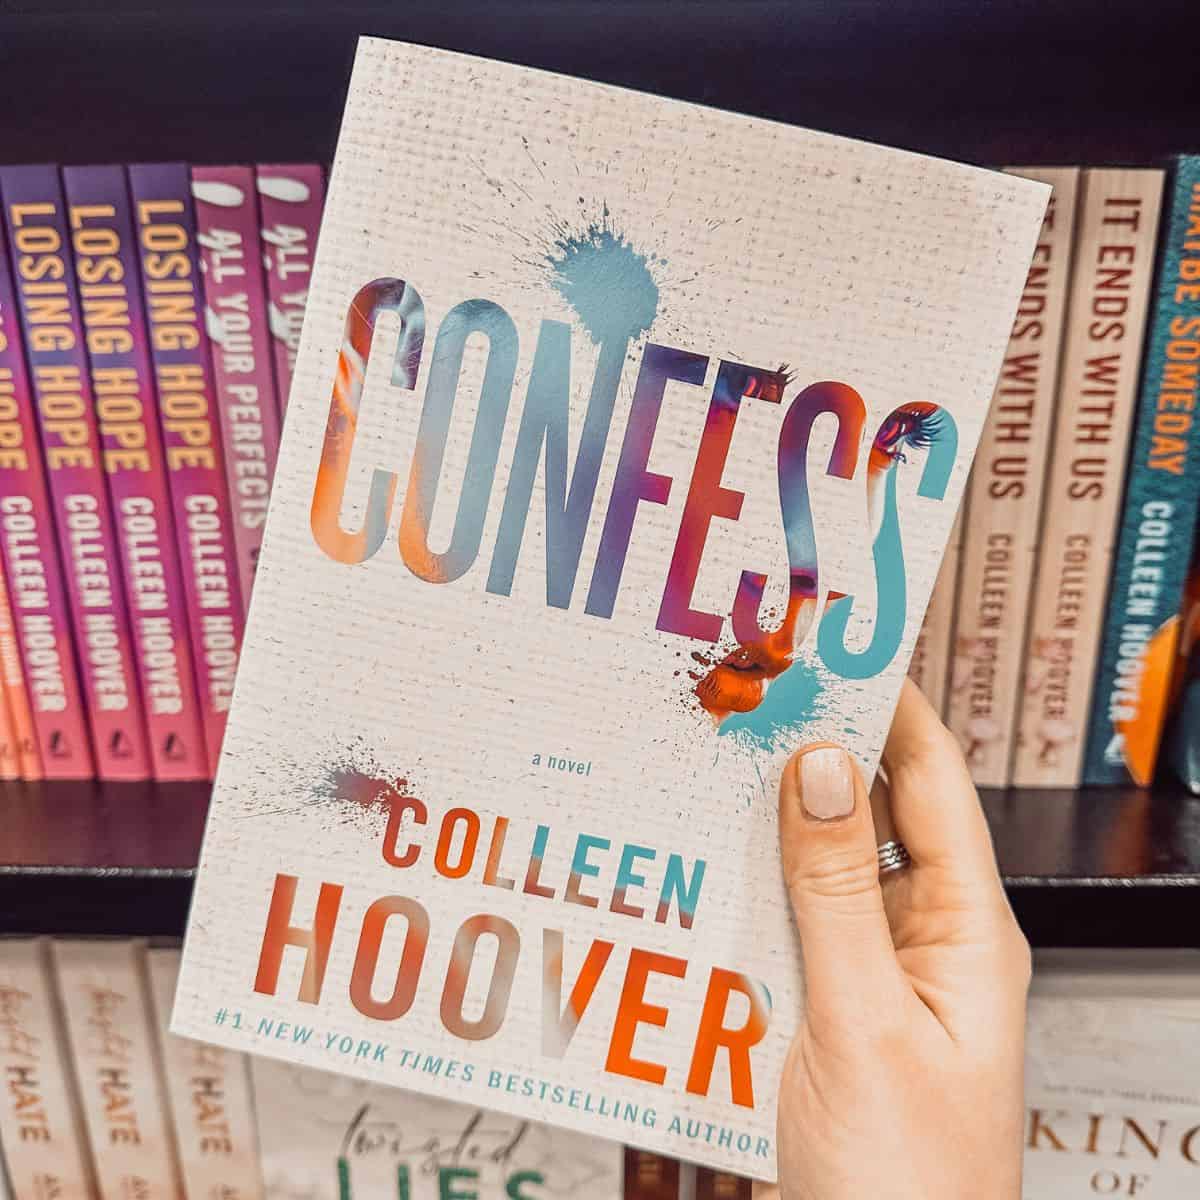 Confess by Colleen Hoover: Summary and Ending Explained